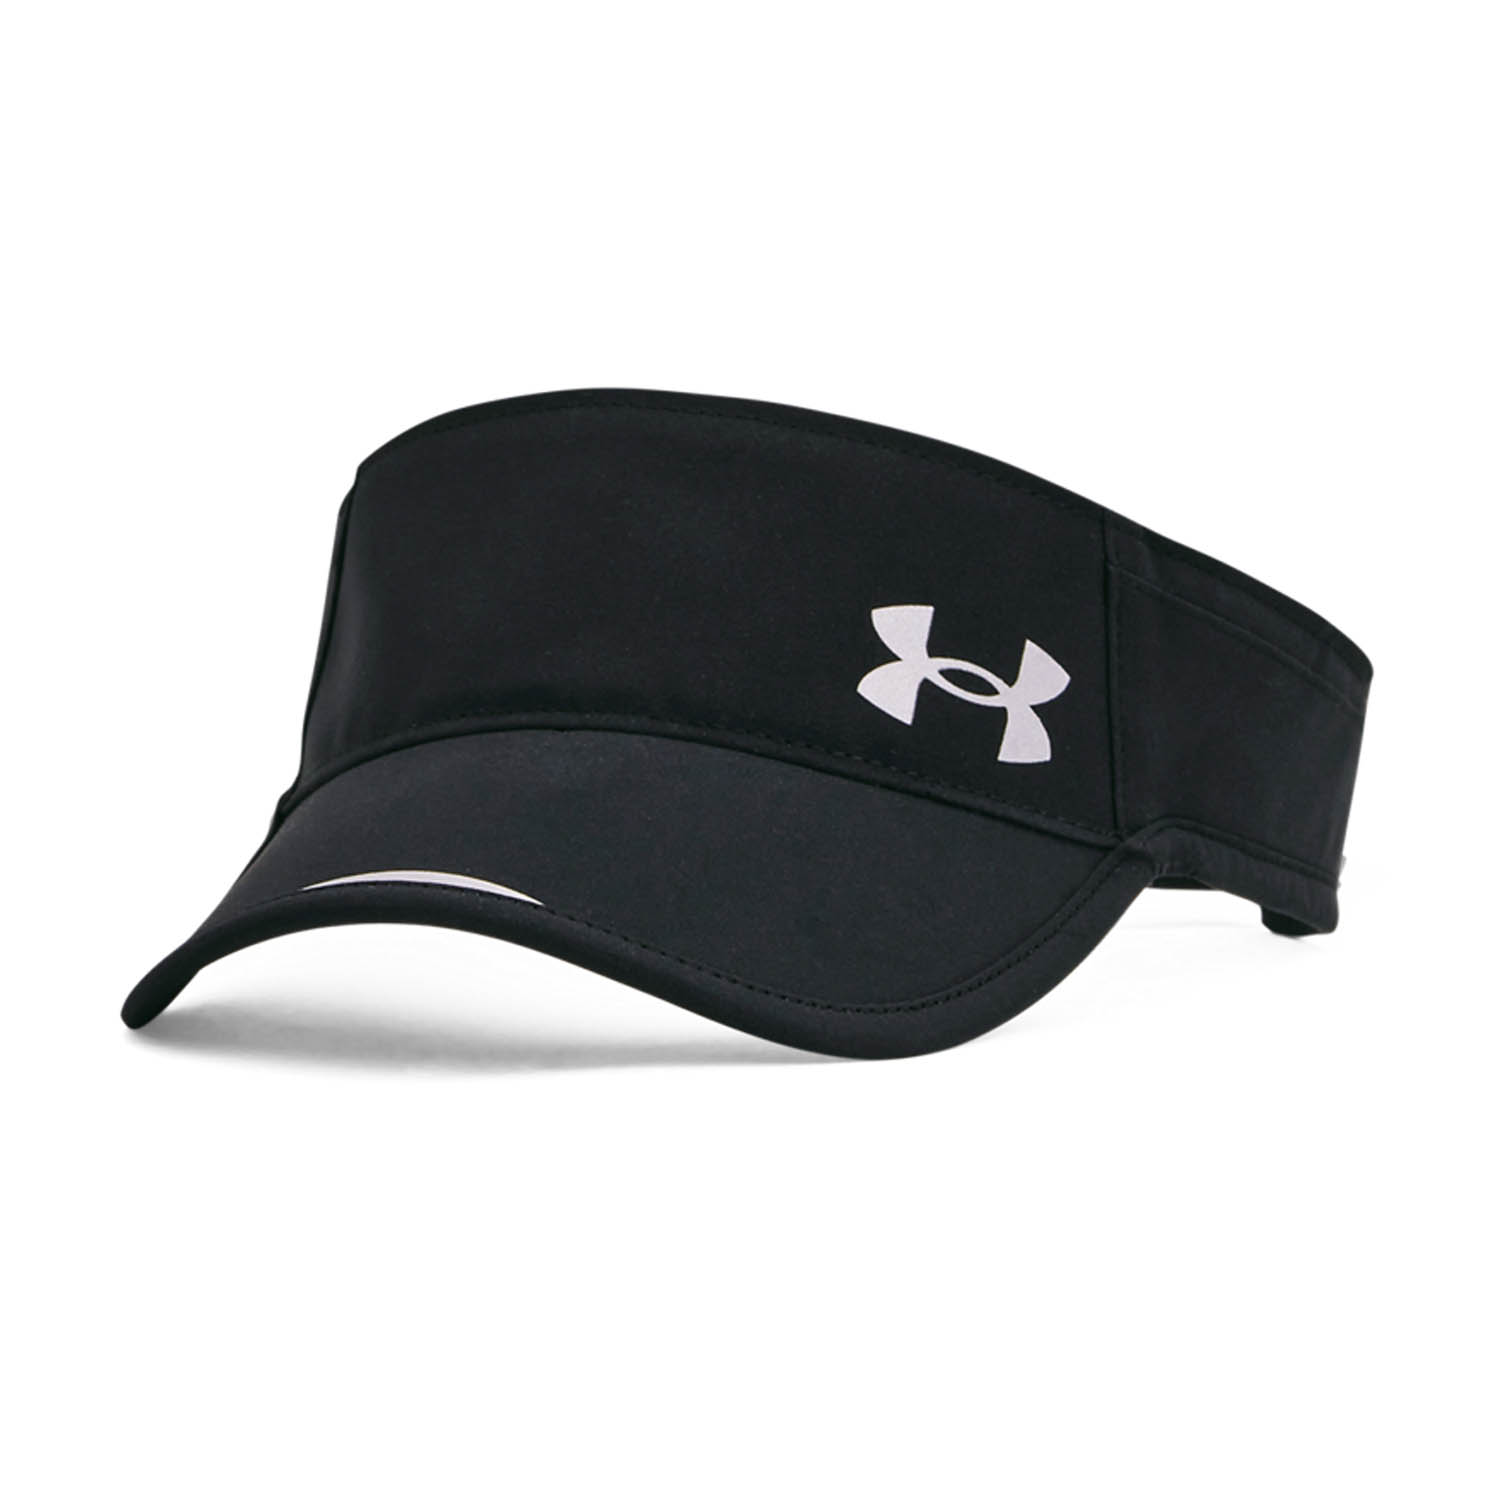 Under Armour IsoChill Launch Visera Mujer - Black/Reflective